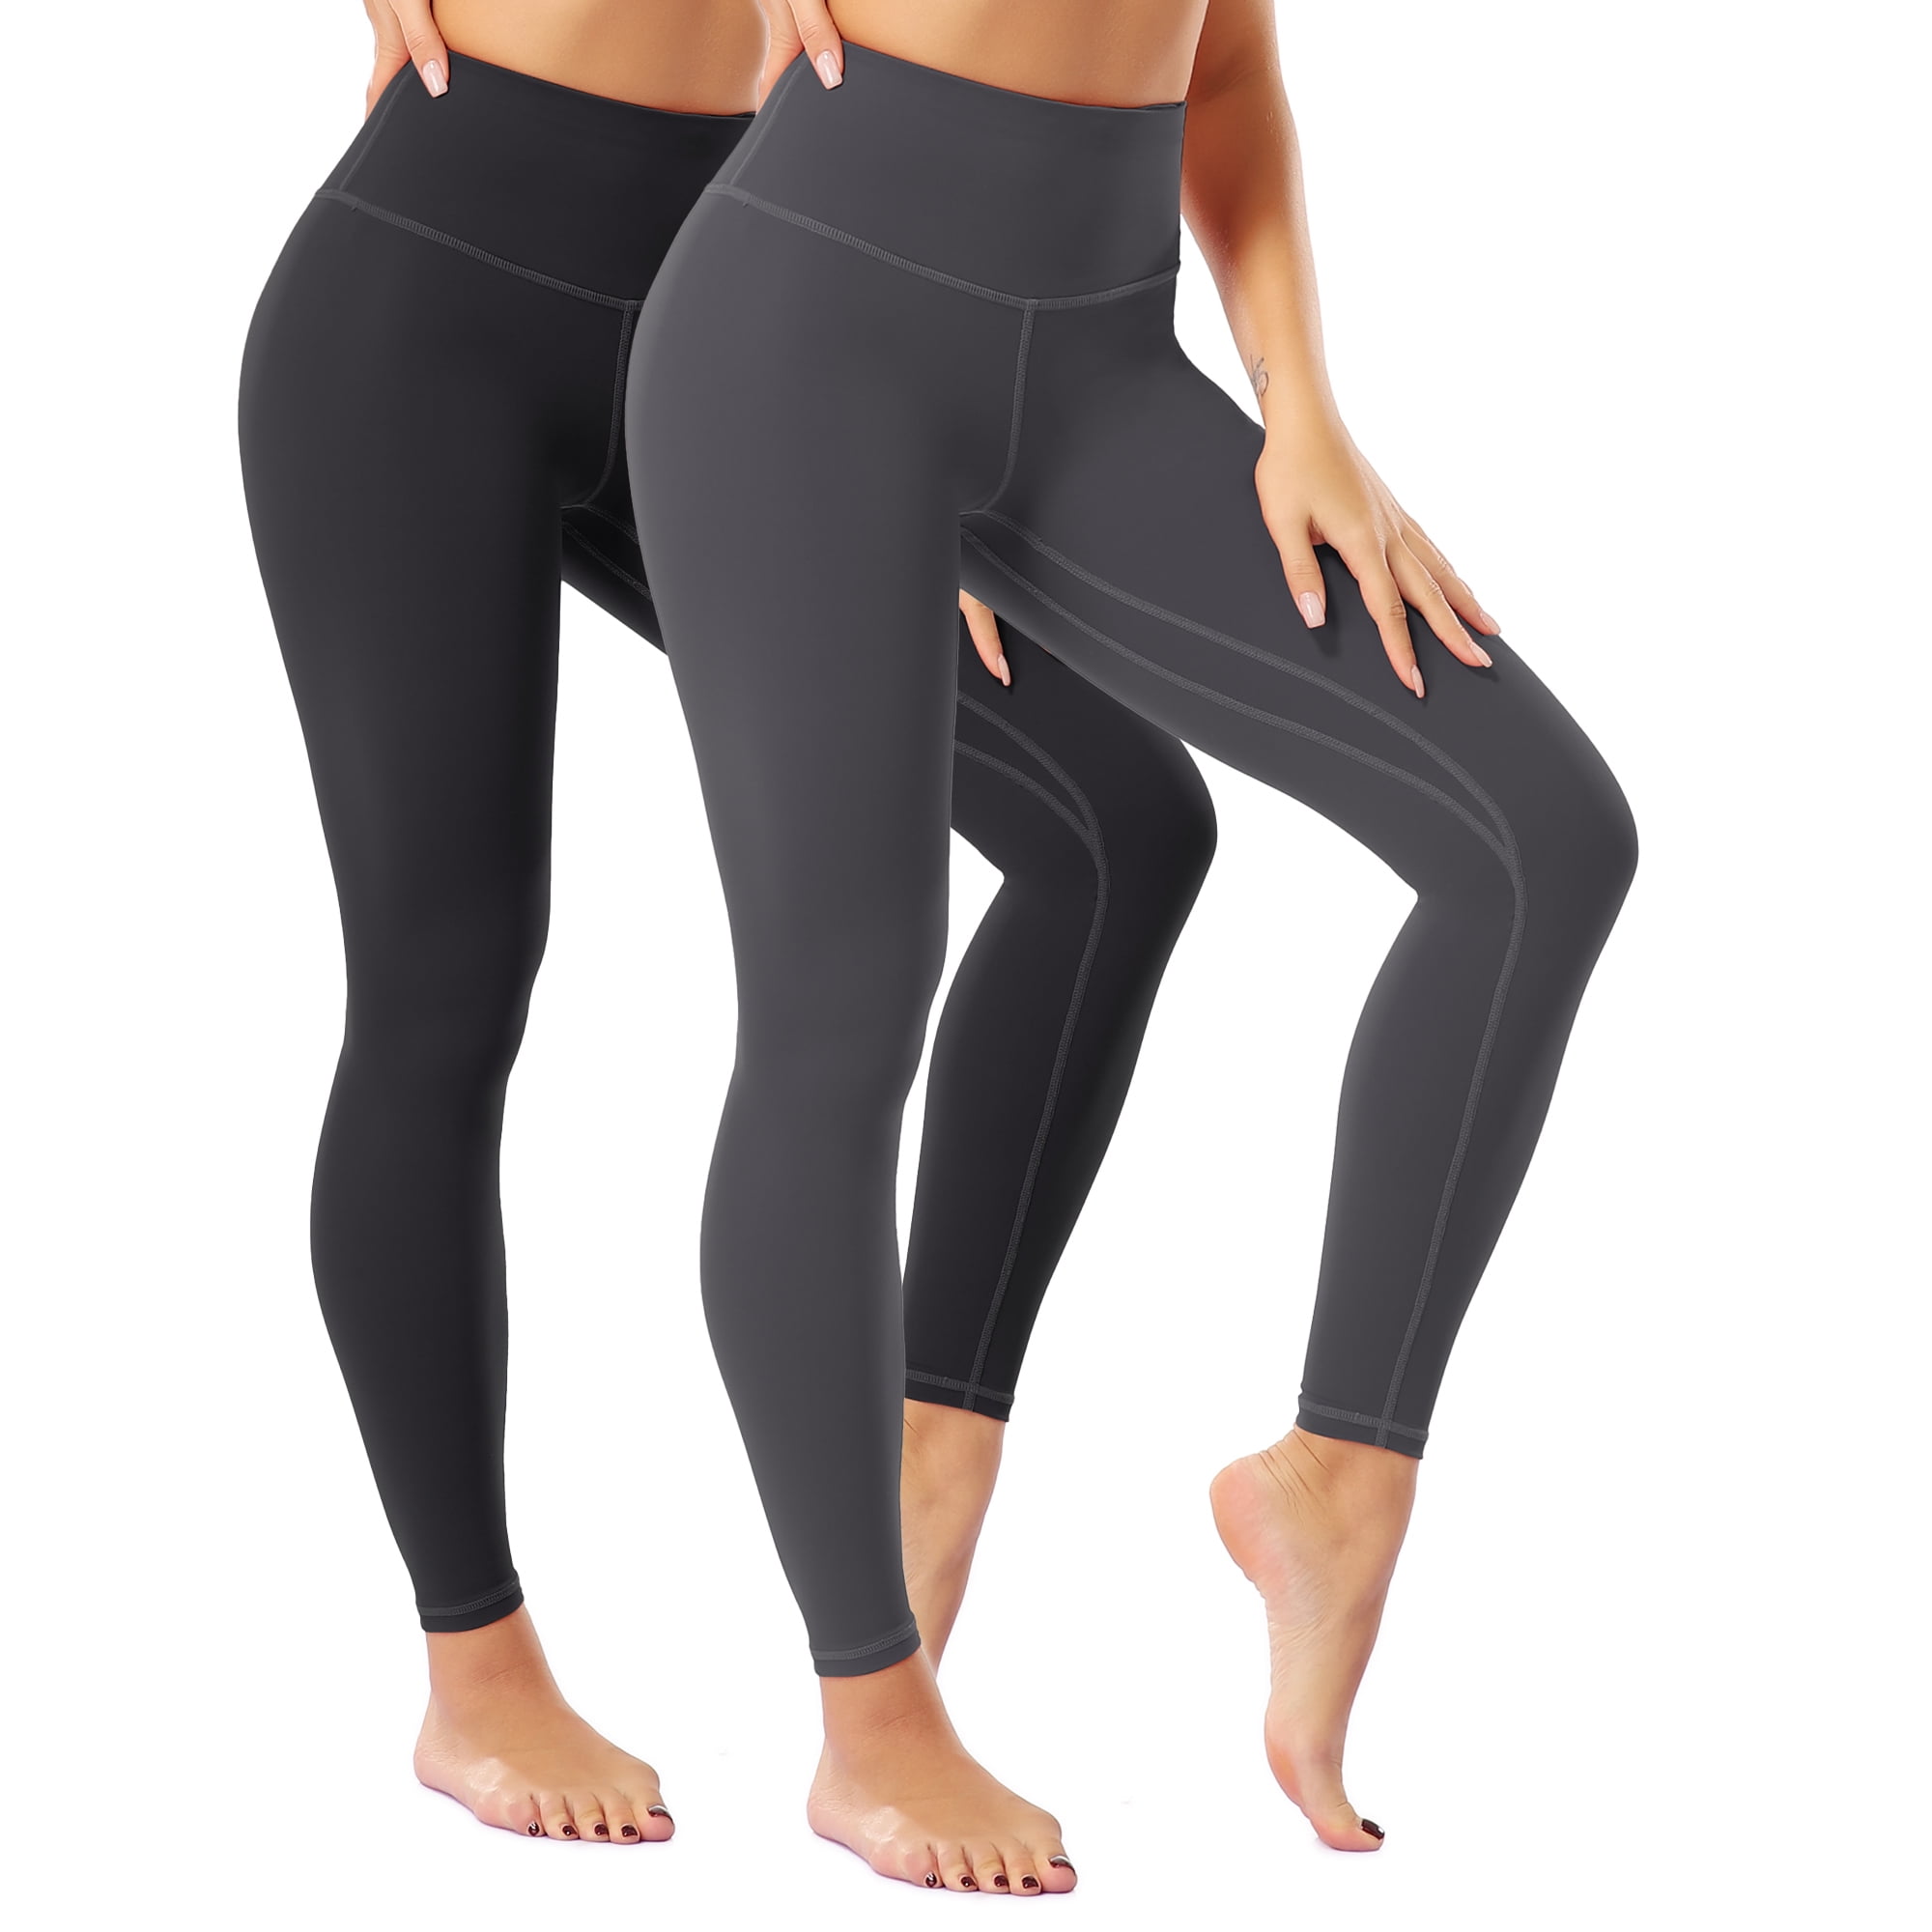 Yoga Pants For Women With Pockets Women's Fitness Sports Stretch